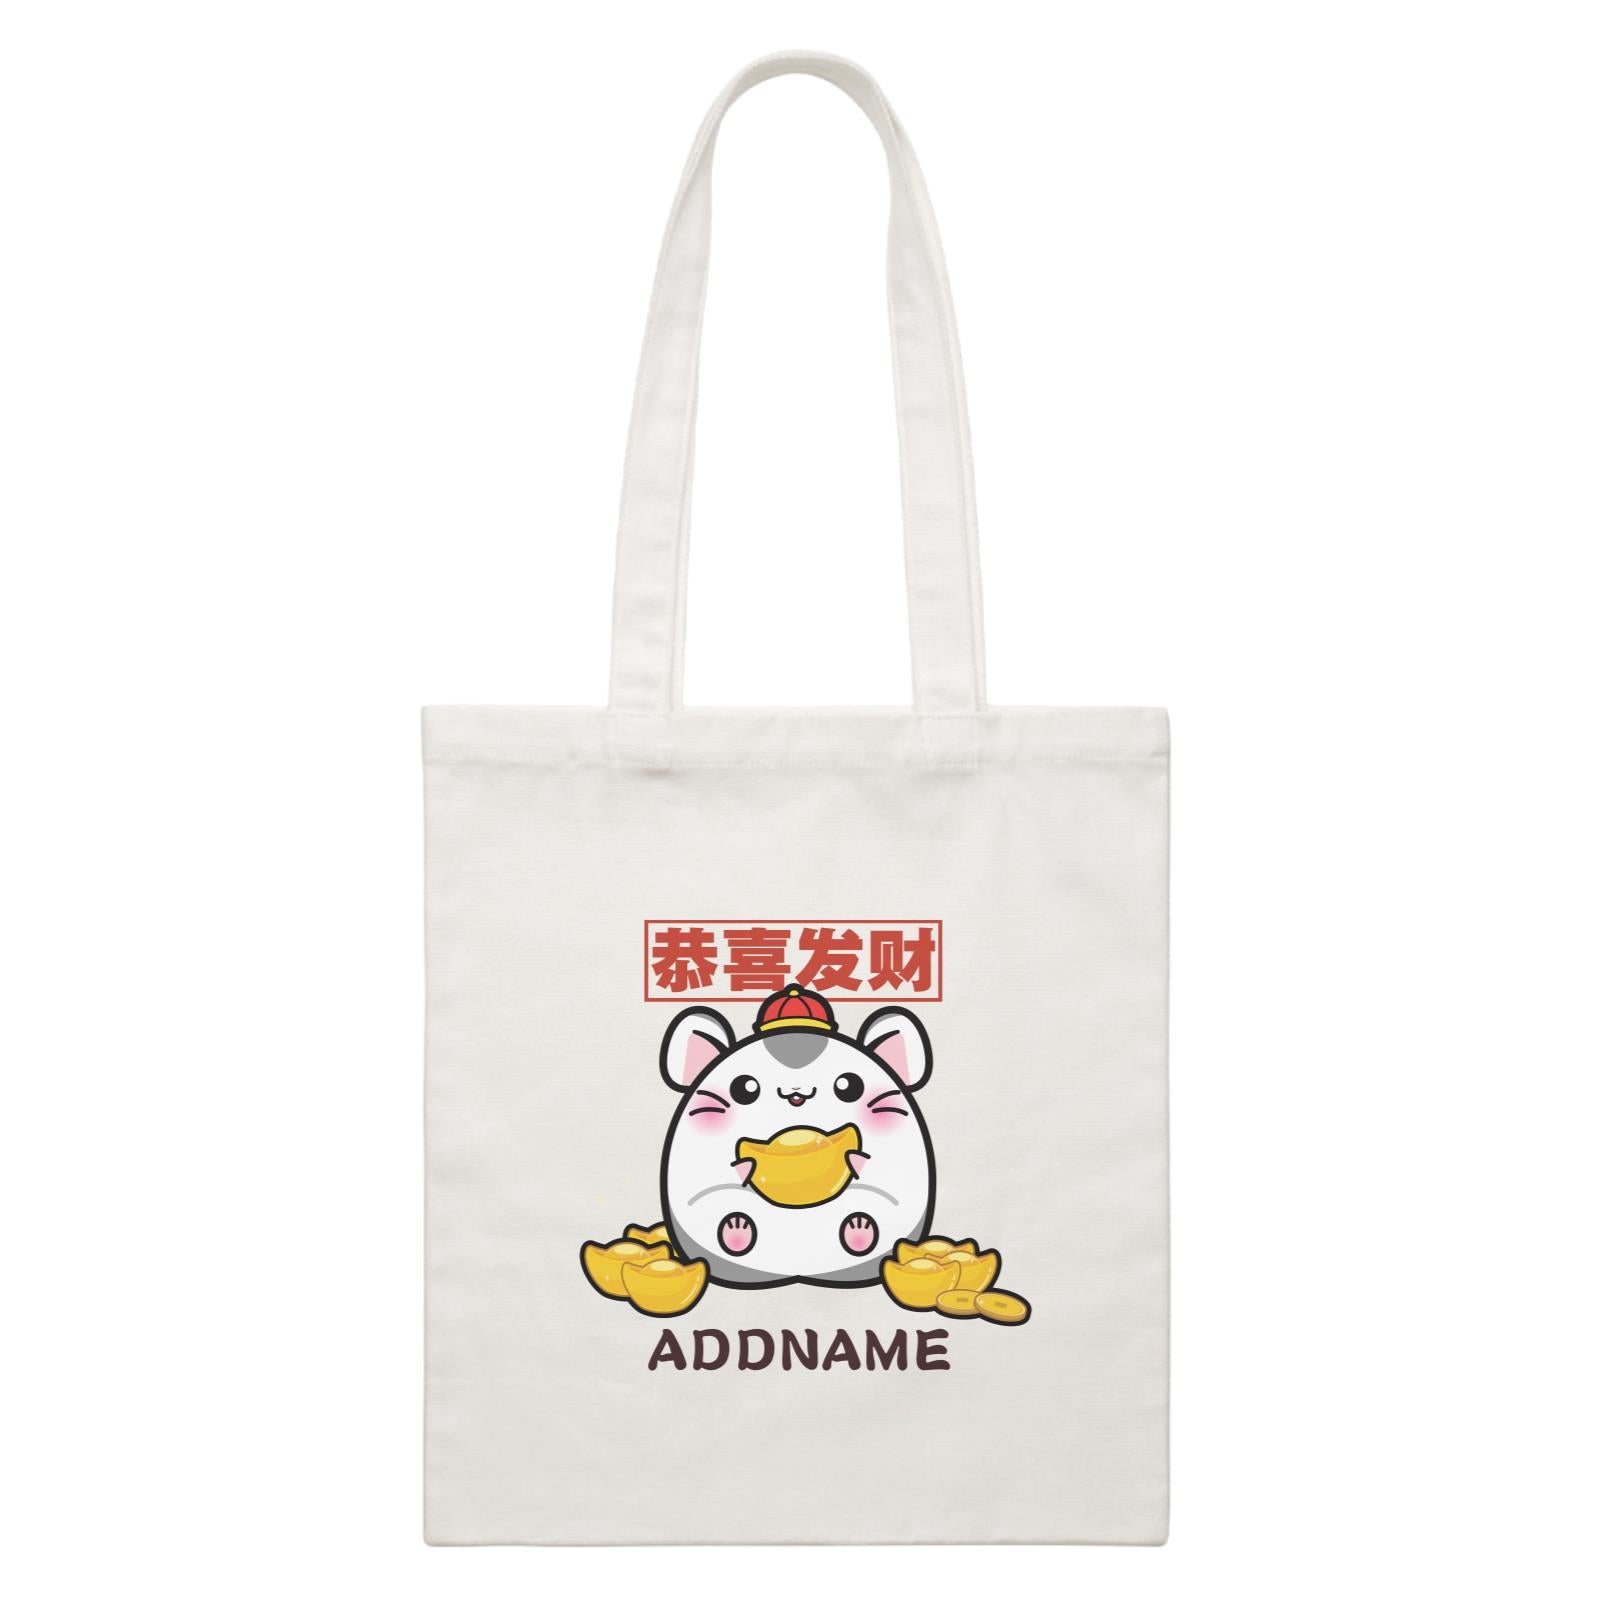 Prosperous Mouse Series Golden Jim Wishes Happy Prosperity Accessories White Canvas Bag